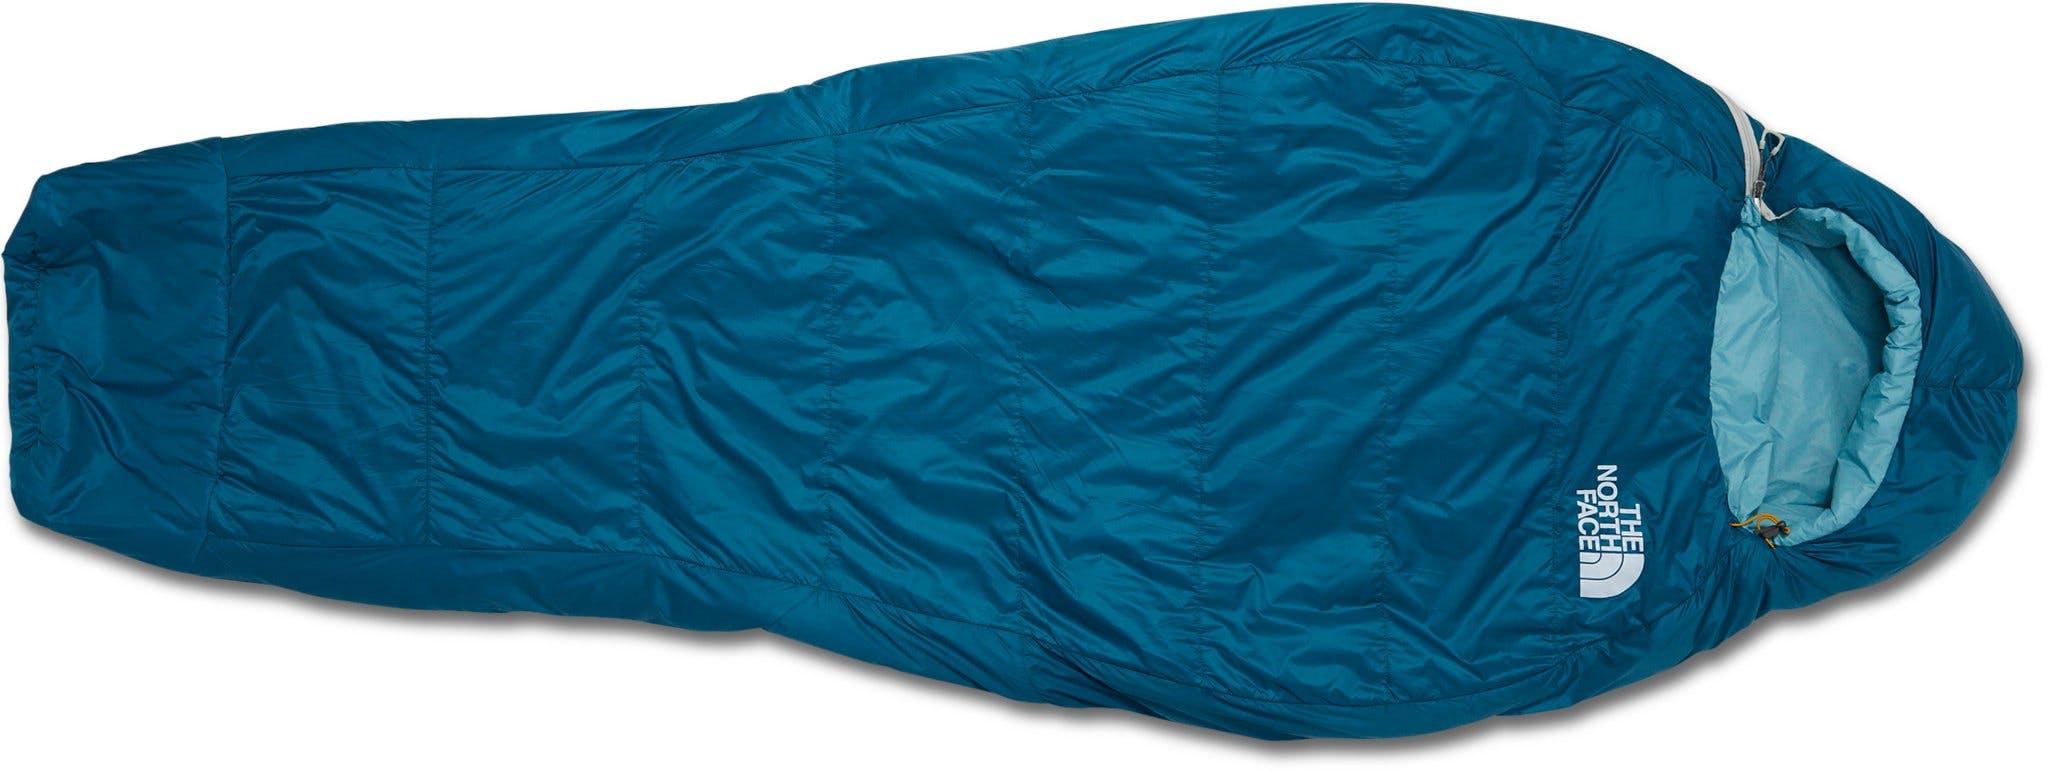 Product image for Trail Lite Down Sleeping Bag - 20°F/-7°C - Unisex